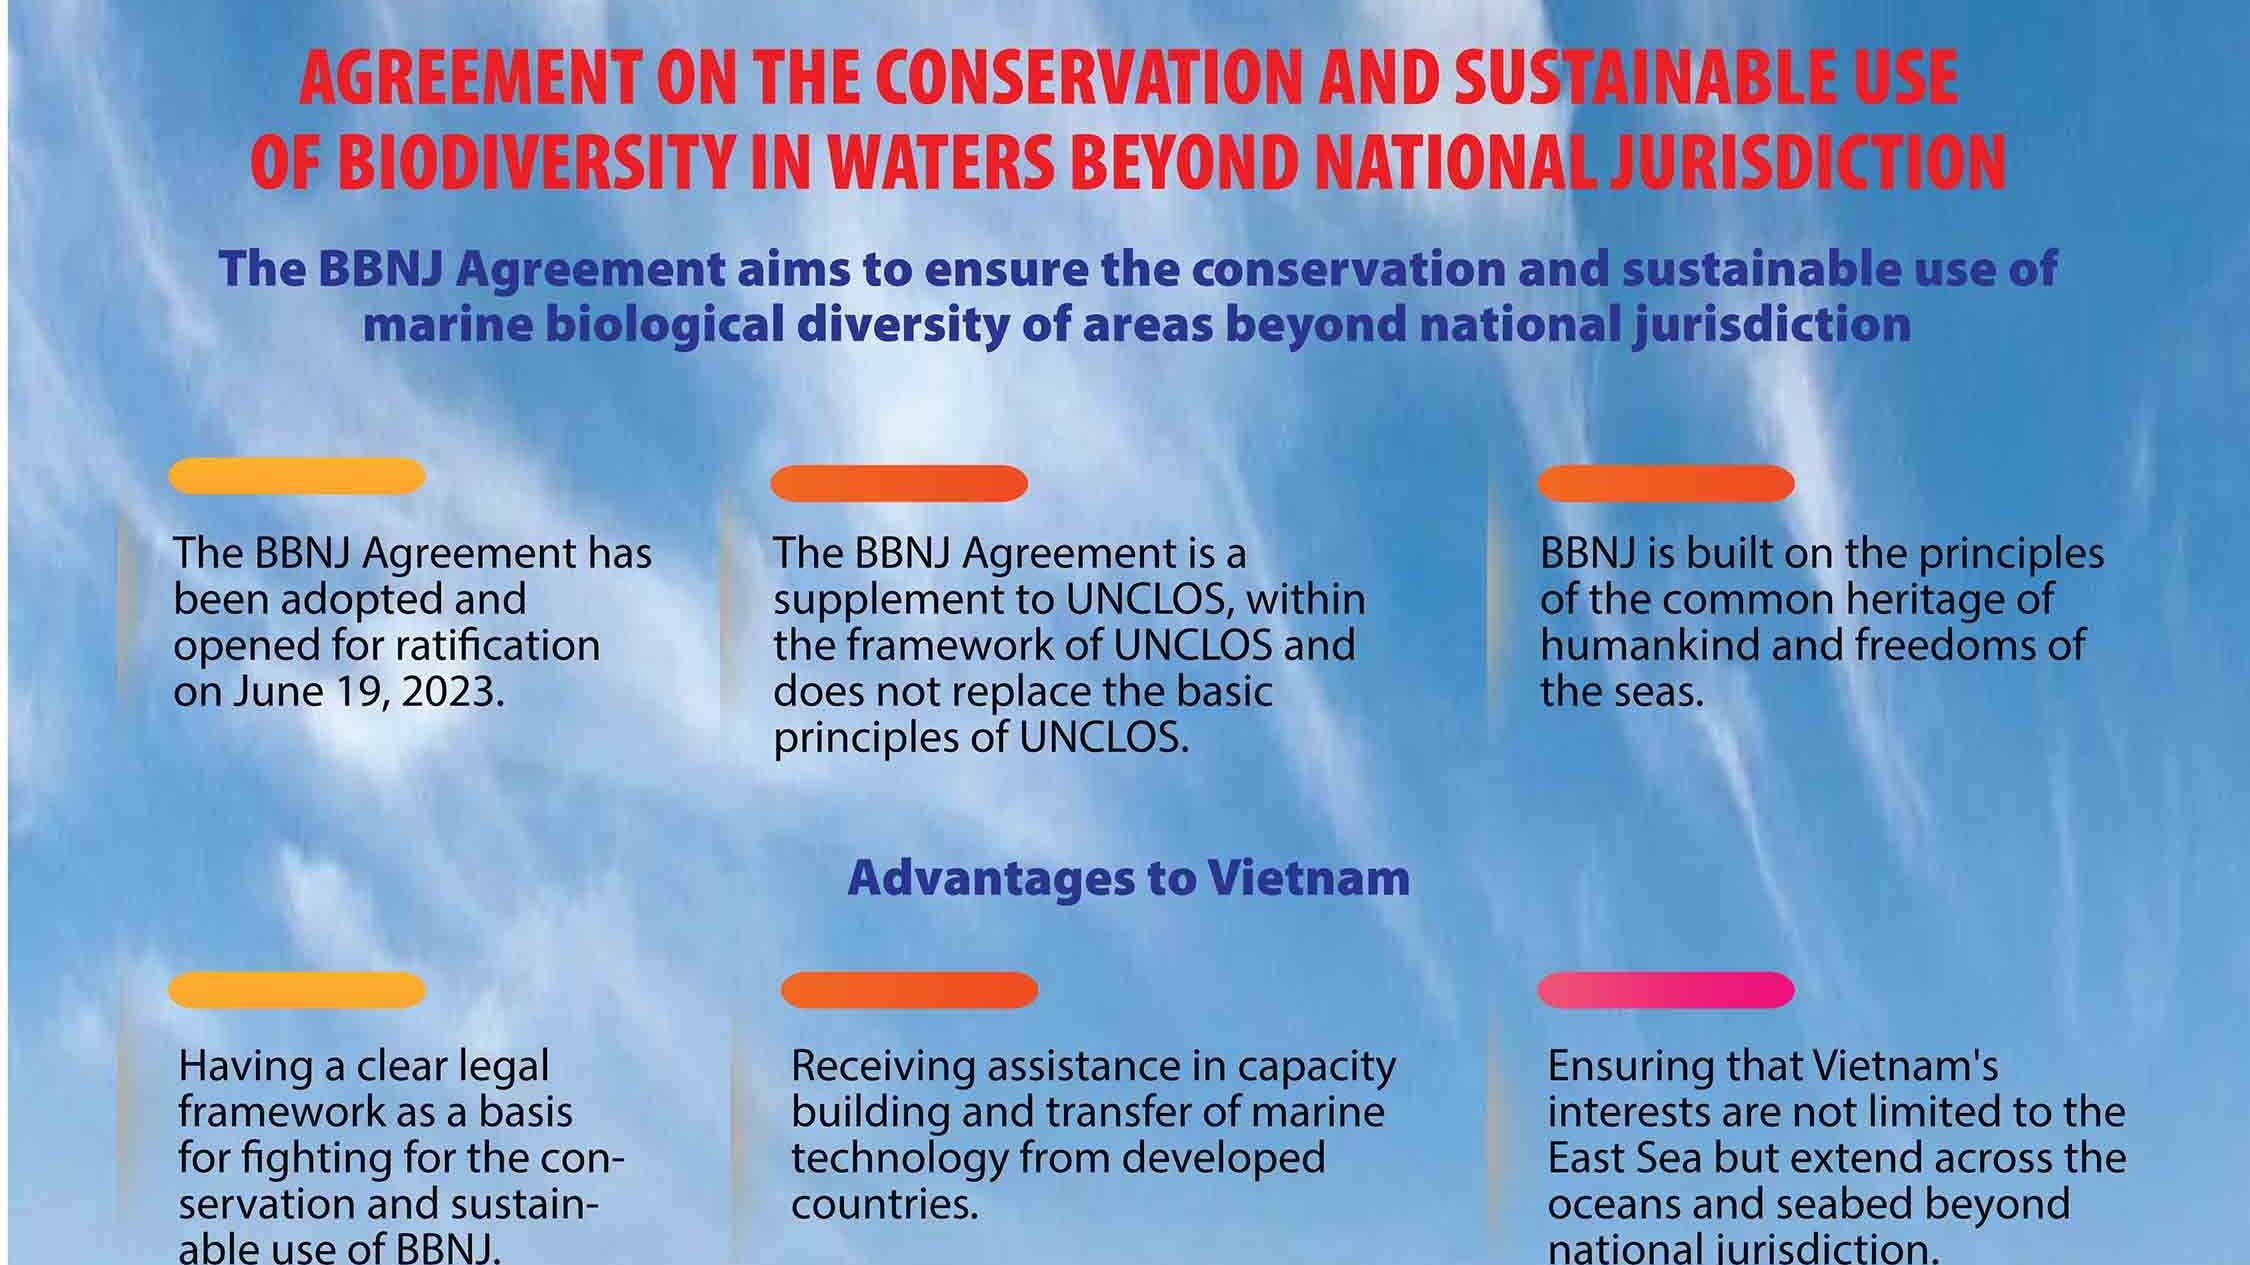 Agreement on the conservation and sustainable use of biodiversity in waters beyond national jurisdiction (BBNJ)